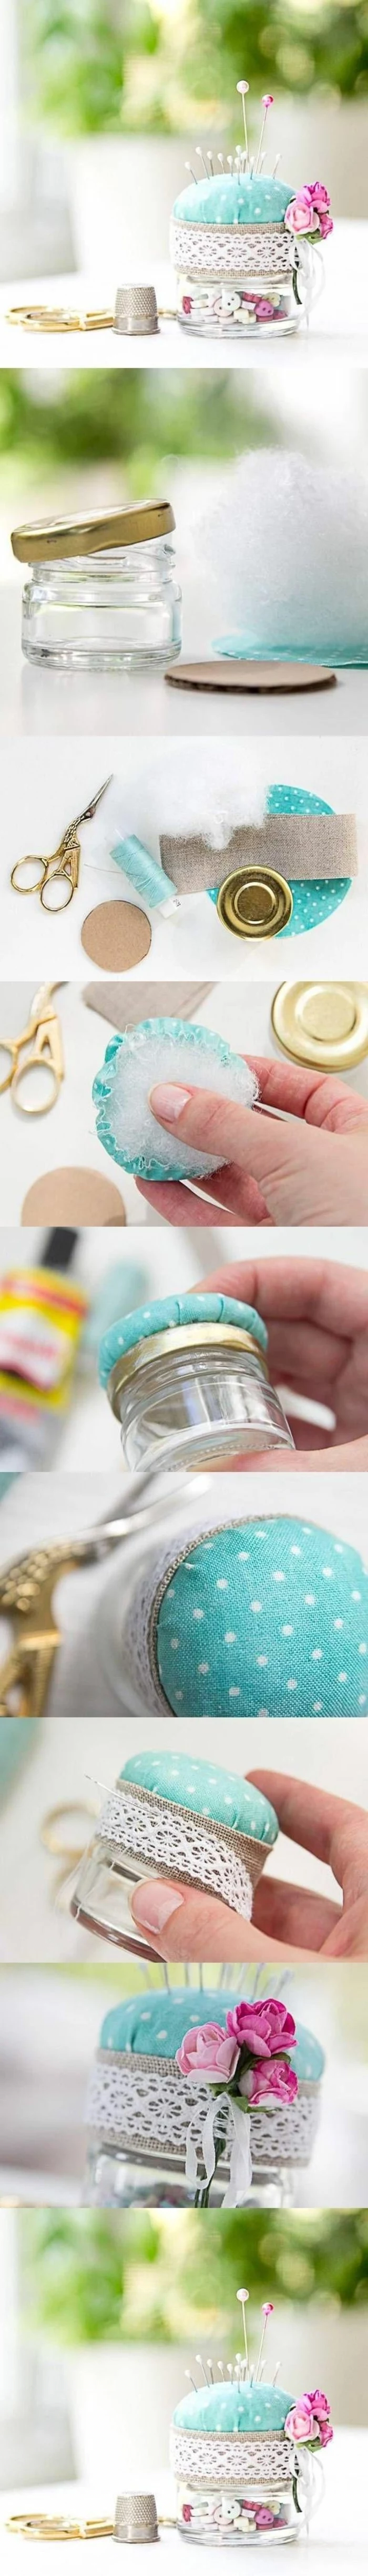 diy tutorial, step by step, fun easy crafts, pins and needles pillow, small jar